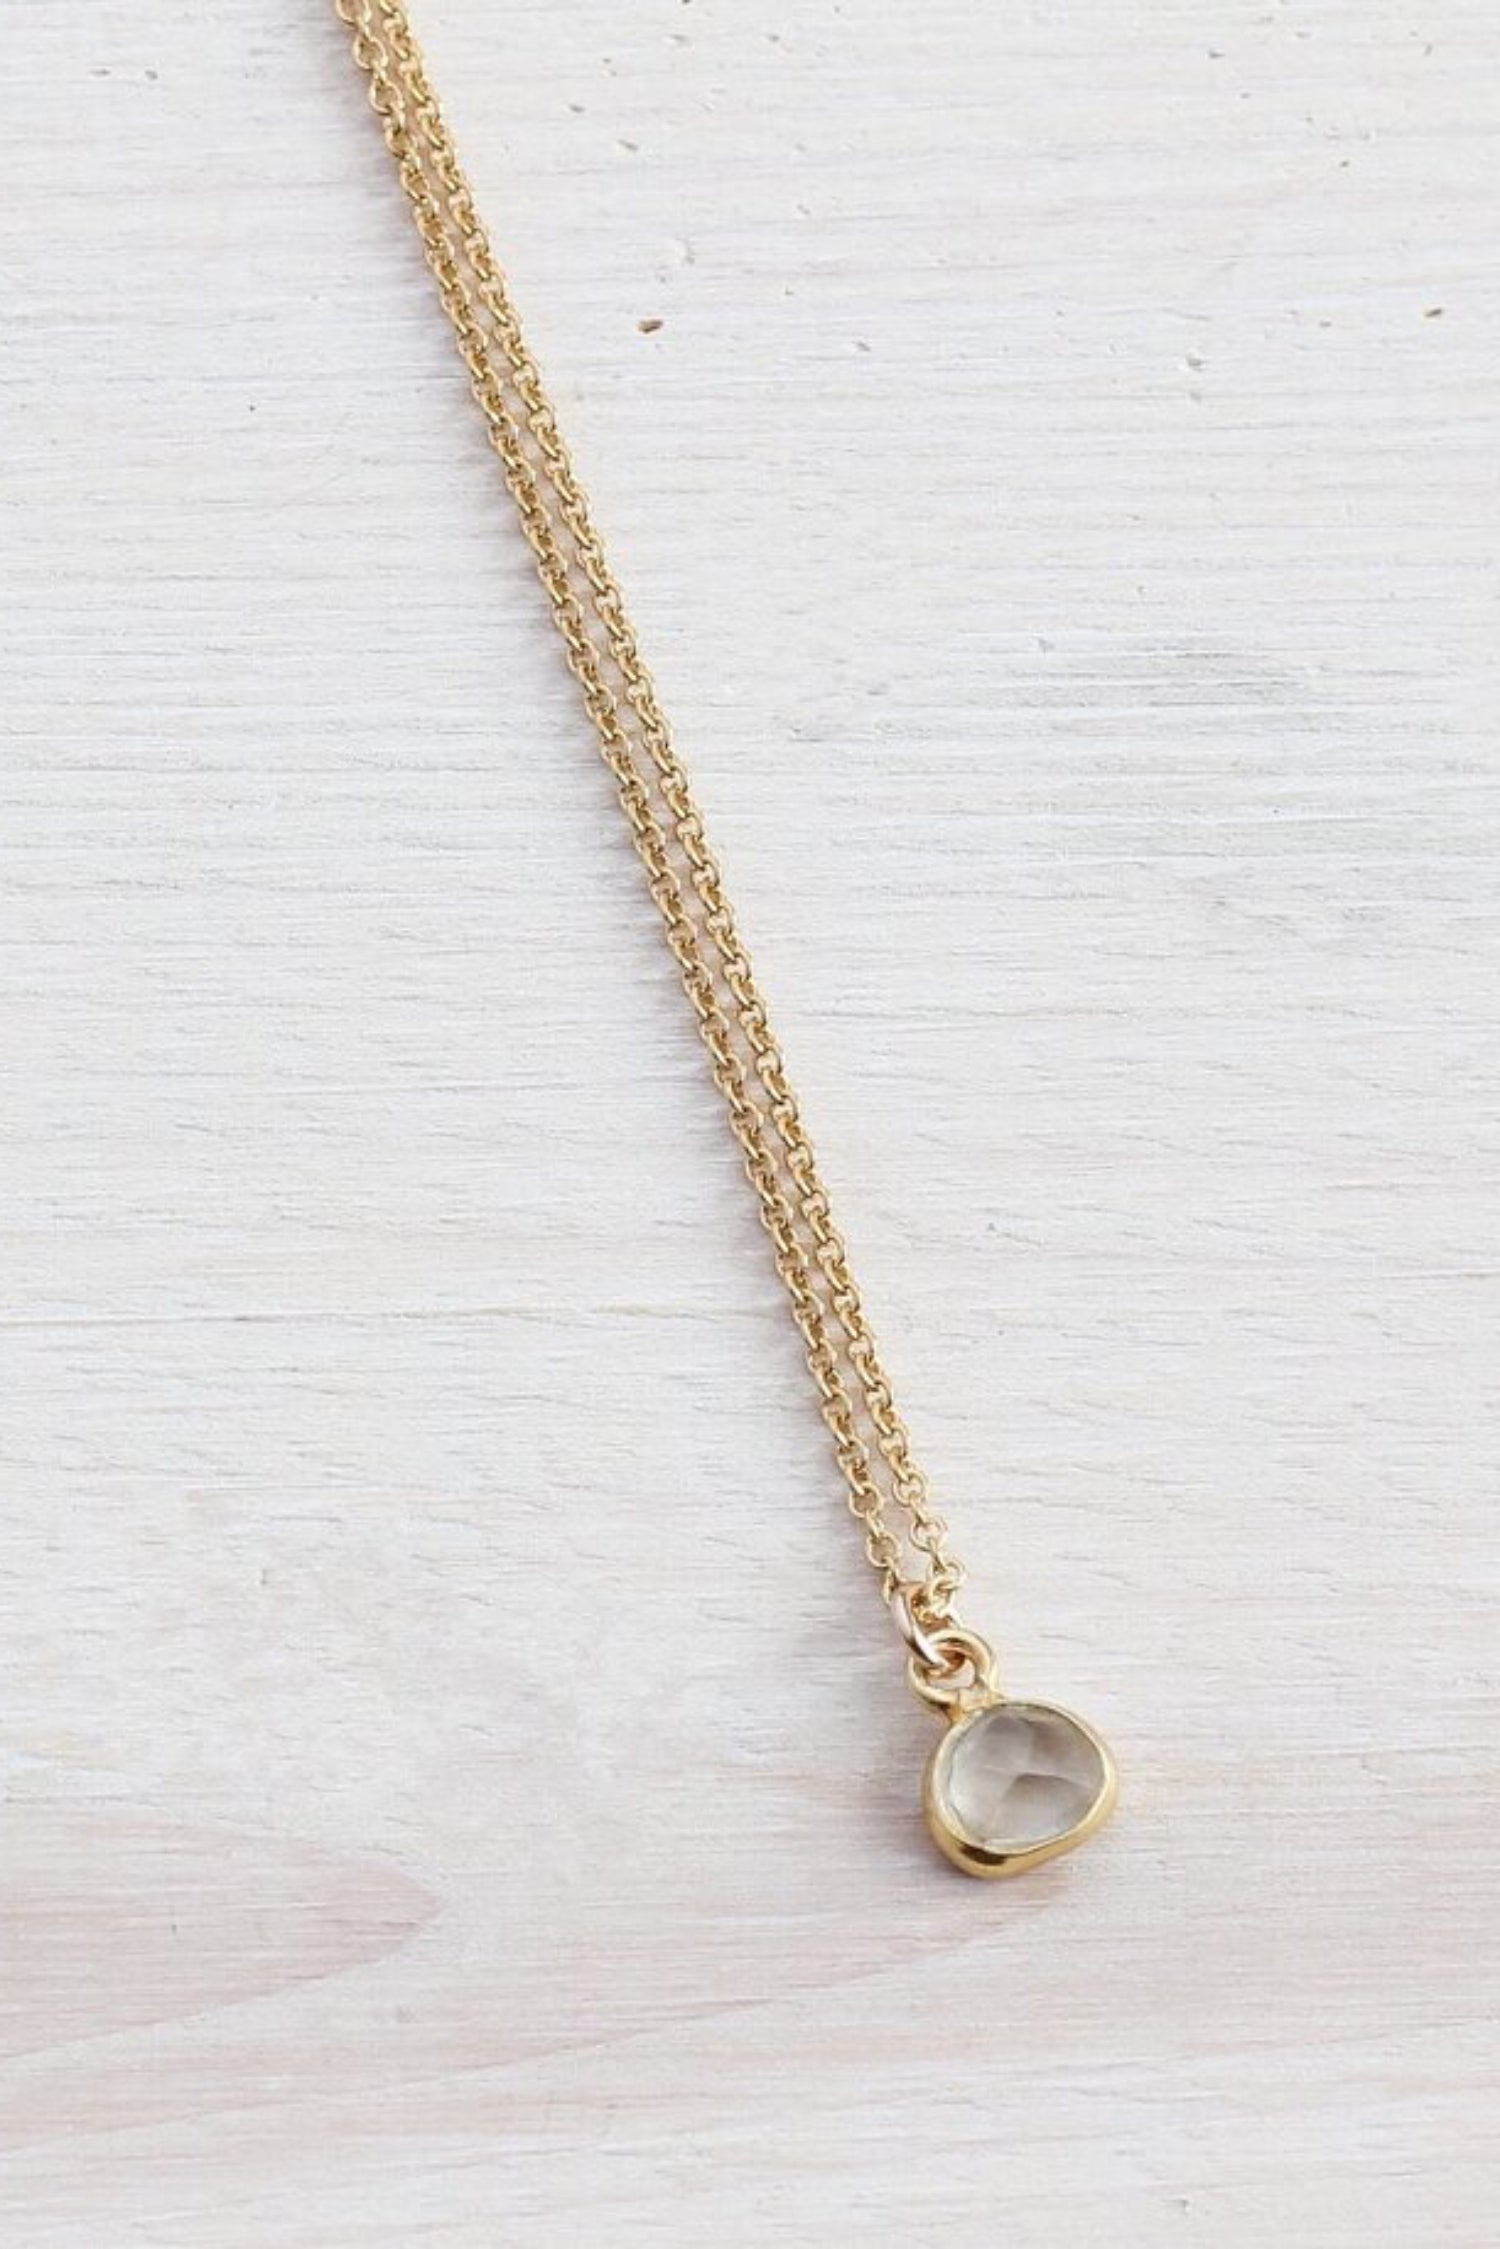 Mini Gem Necklace by Katye Landry, Clear Crystal Quartz, gold vermeil, 14k goldfill round cable chain, made in Ottawa